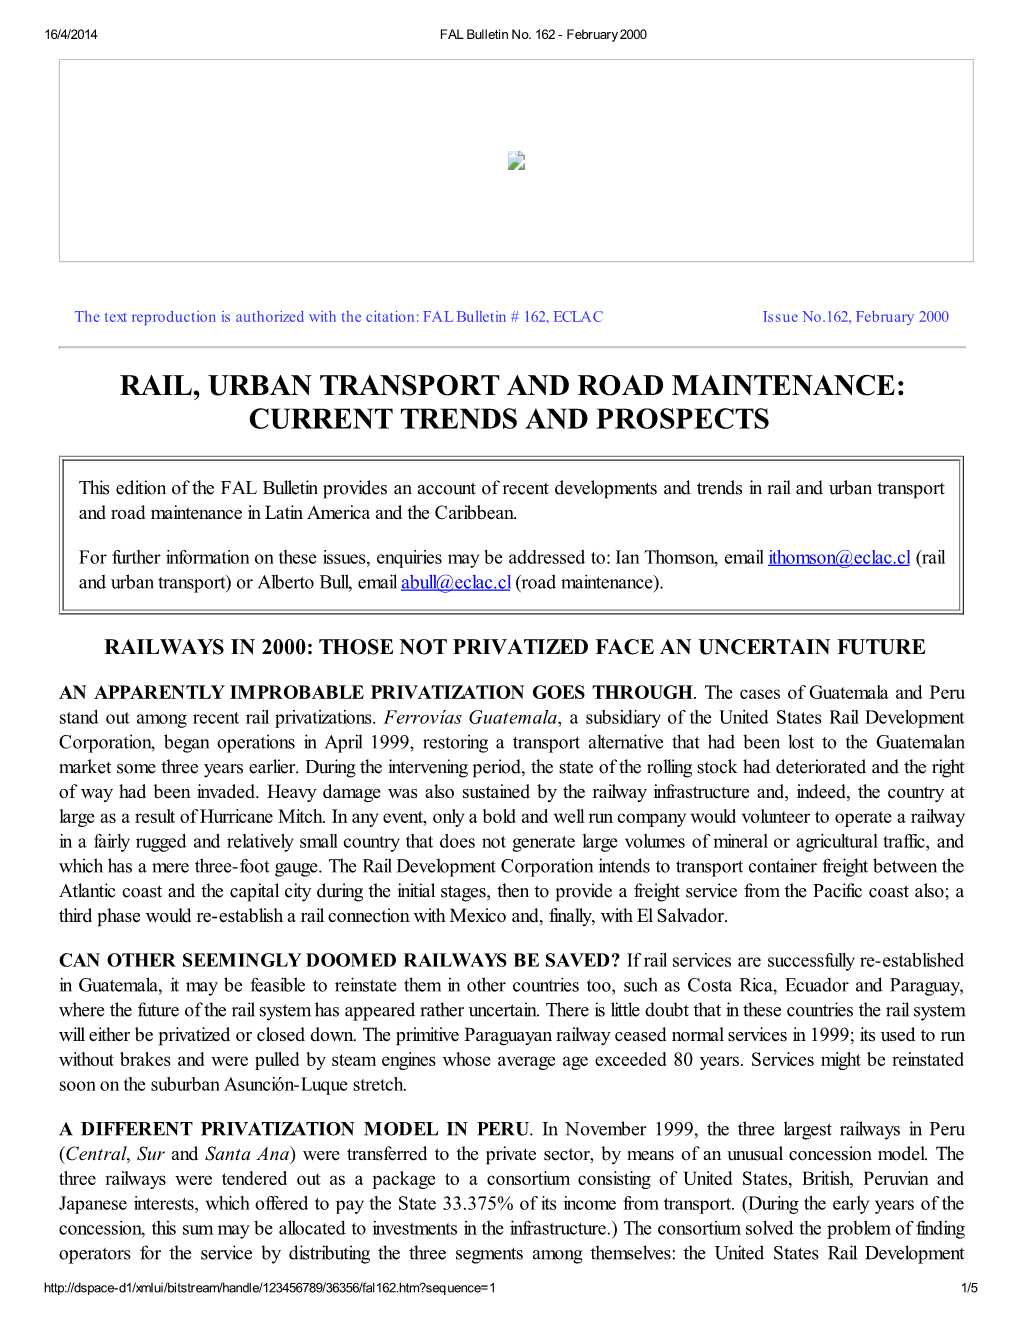 Rail, Urban Transport and Road Maintenance: Current Trends and Prospects